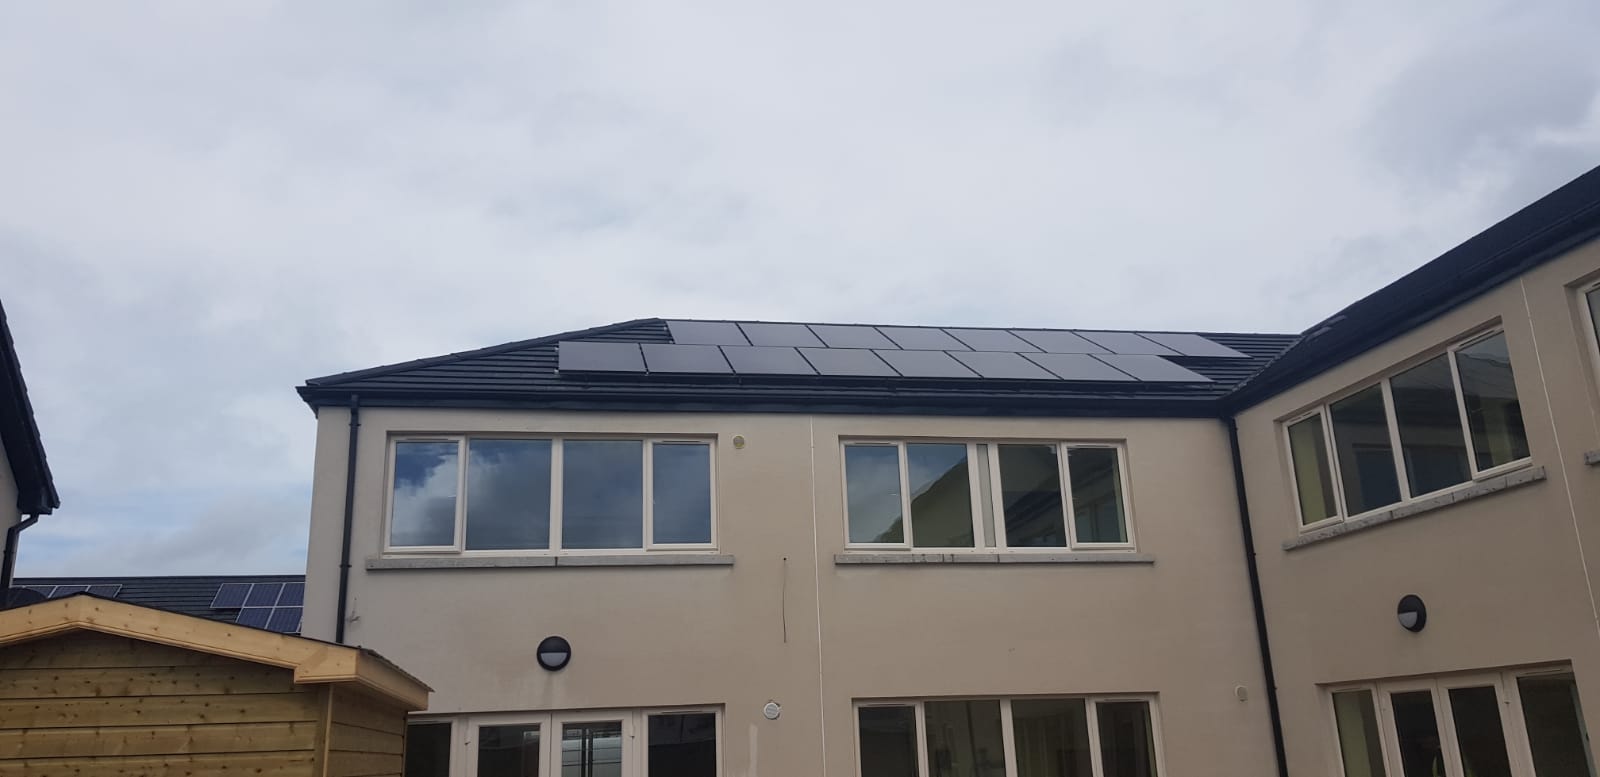 Solar Panels installed on the roof of a domestic home in Ireland